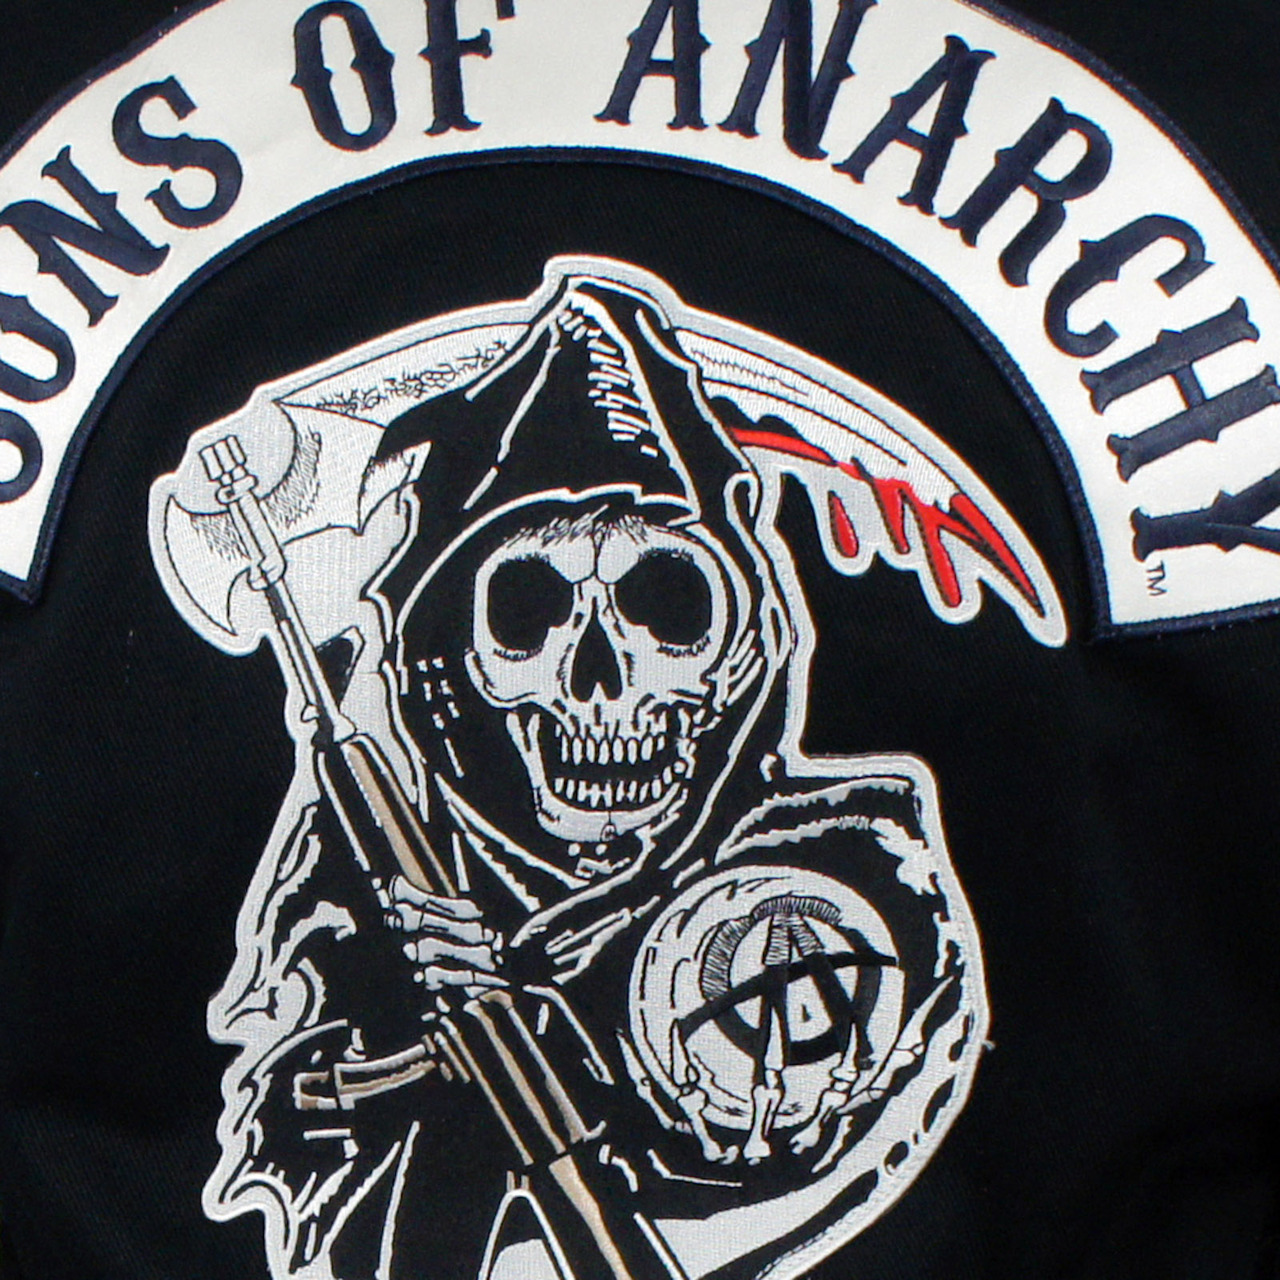 Download Sons of anarchy Logos